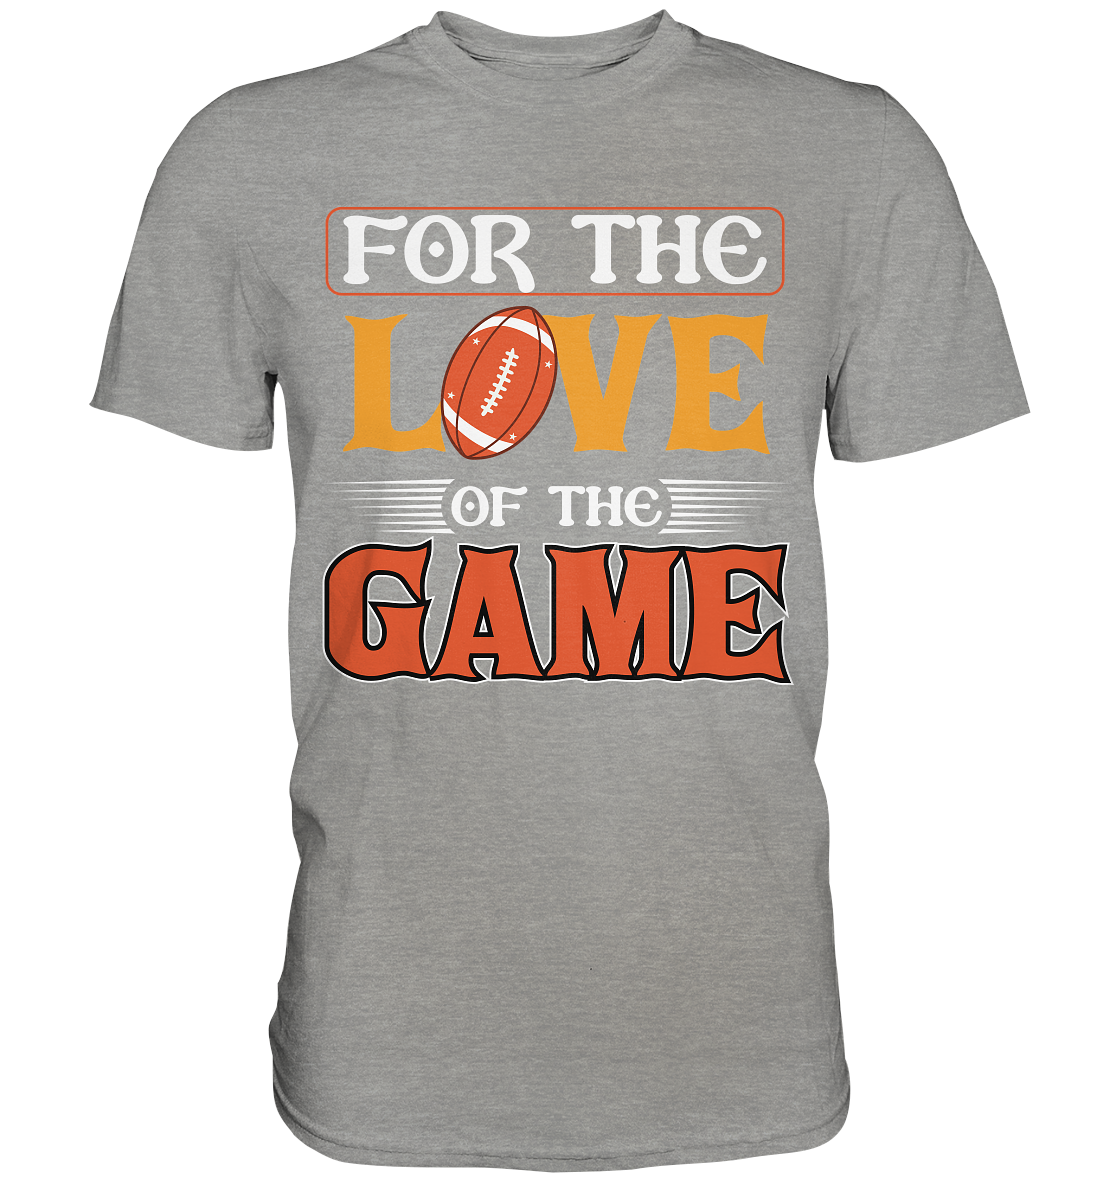 For the Love of the Game - Premium Shirt - Football Unity Football Unity